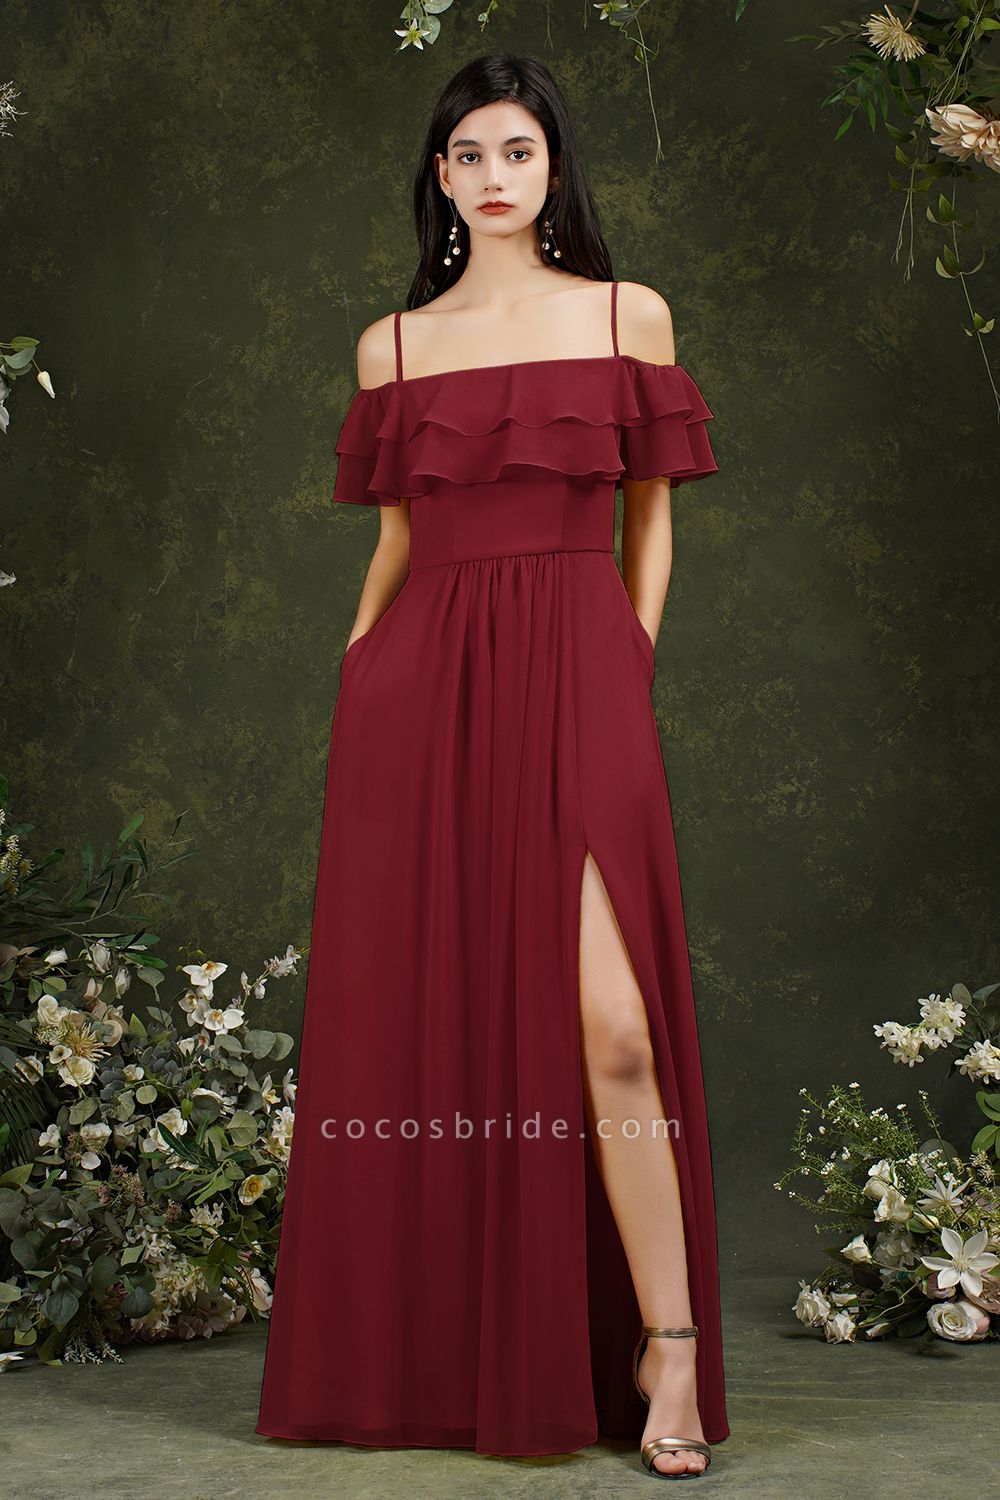 Vintage Off-the-shoulder Spaghetti Straps Backless A-line Split Chiffon Bridesmaid Dress With Pockets